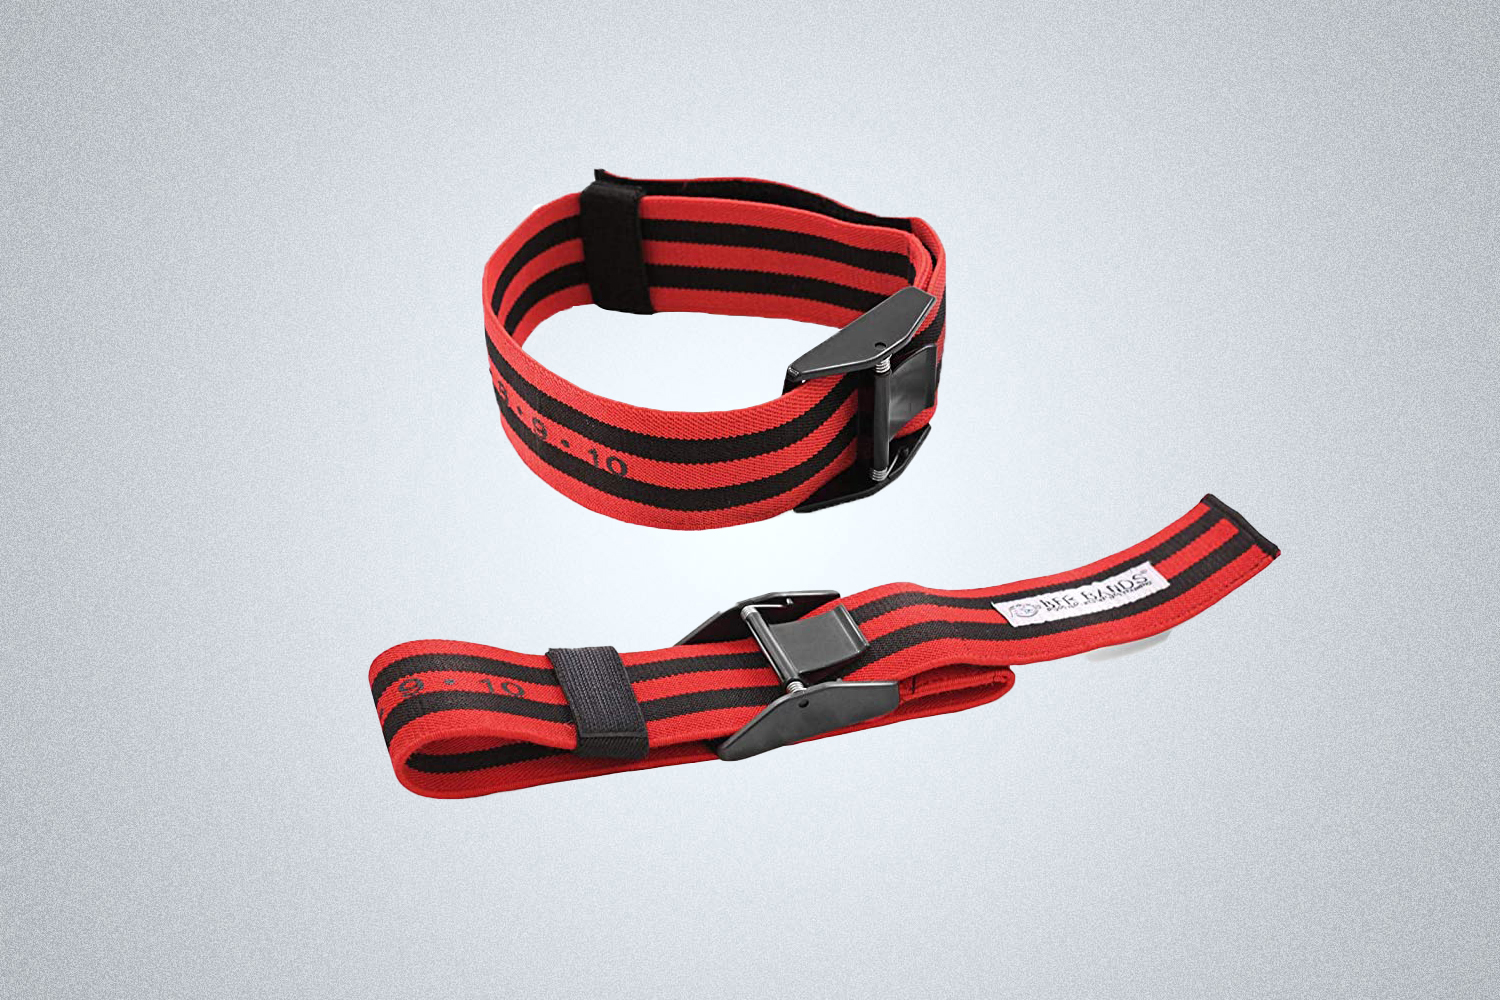 The BFR Pro X Blood Flow Restriction Bands in red and black is a portable piece of fitness equipment designed to build bigger muscles when working out